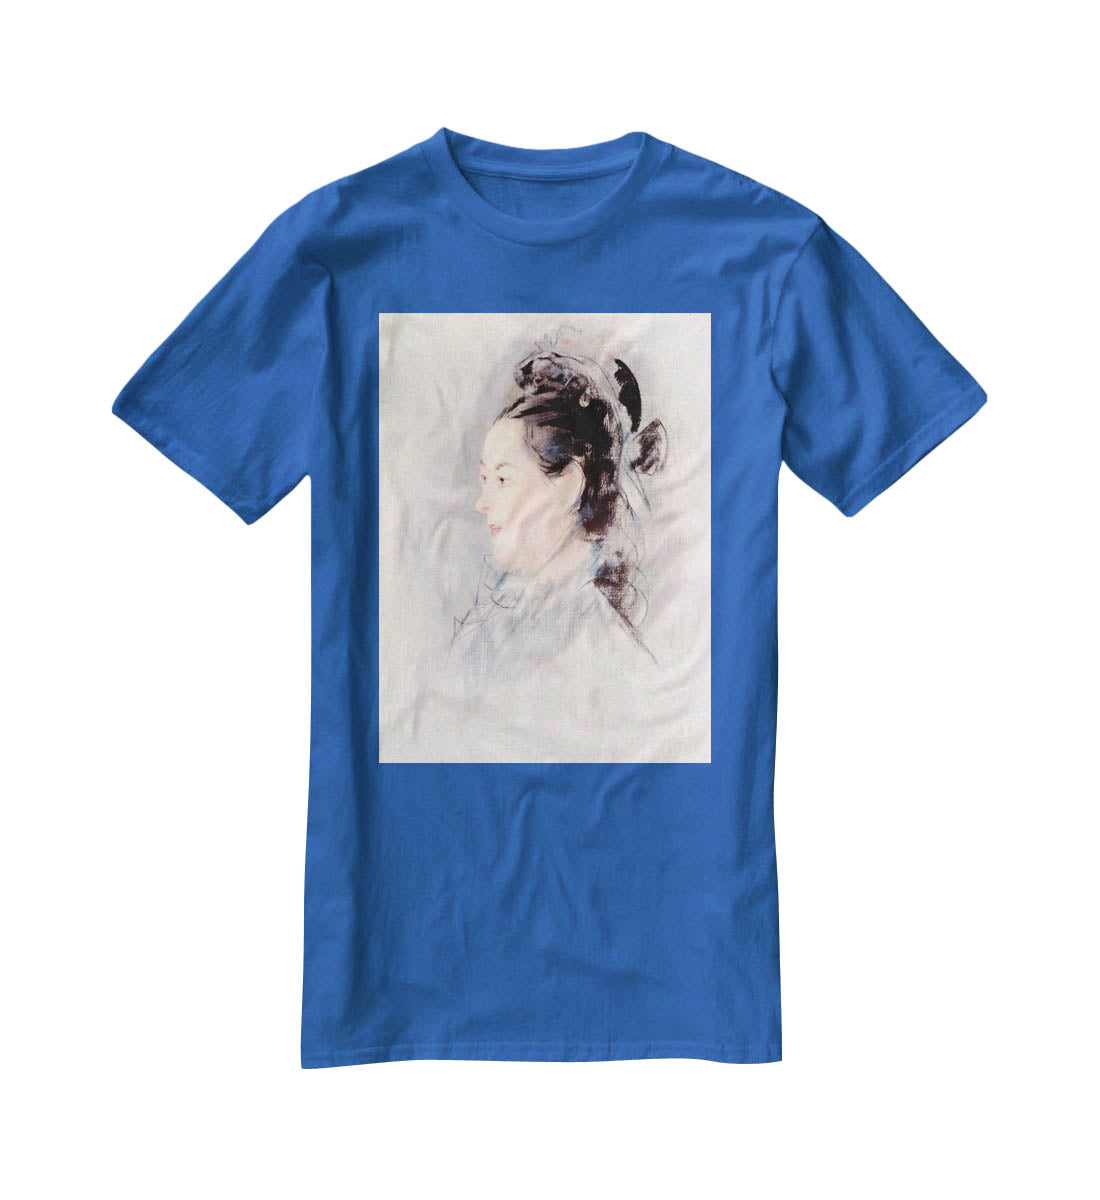 Lady with Hair Up by manet T-Shirt - Canvas Art Rocks - 2